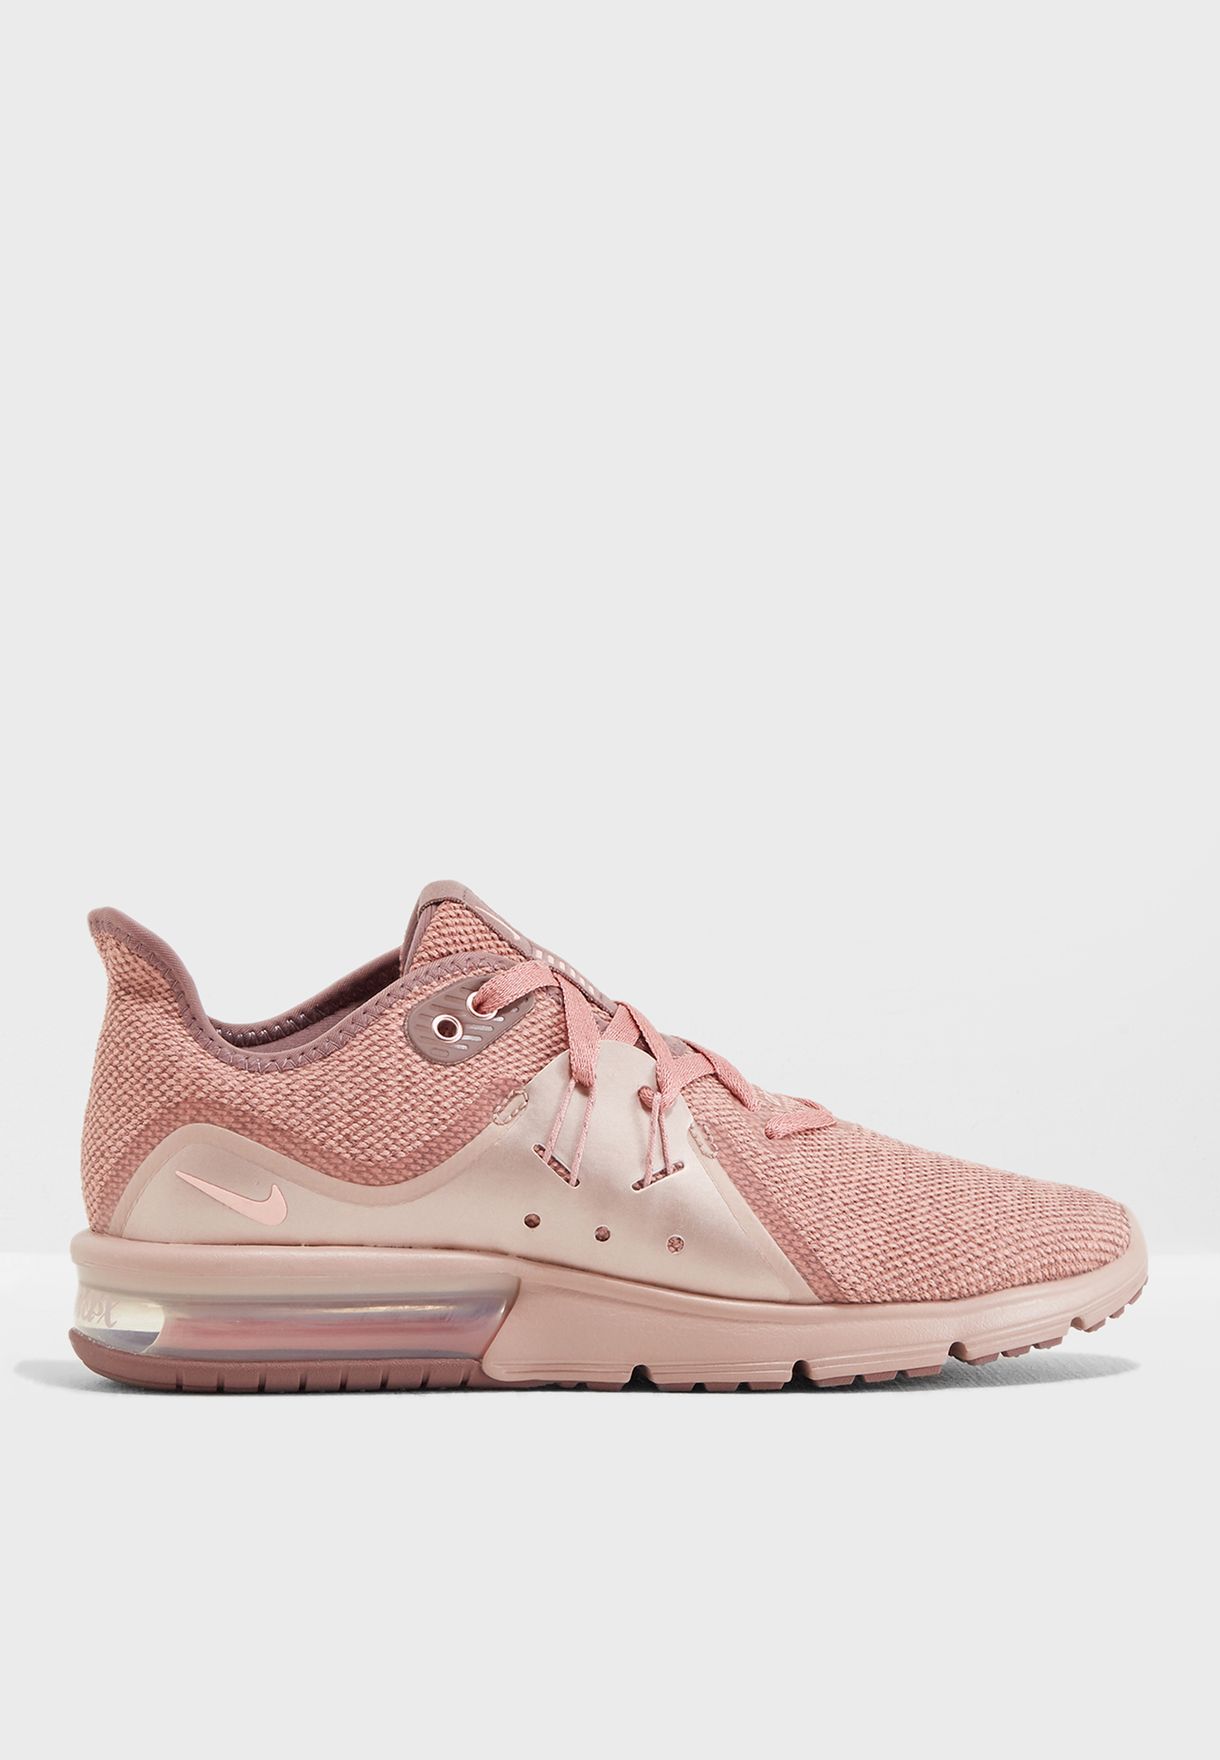 nike air max sequent 2 bronze